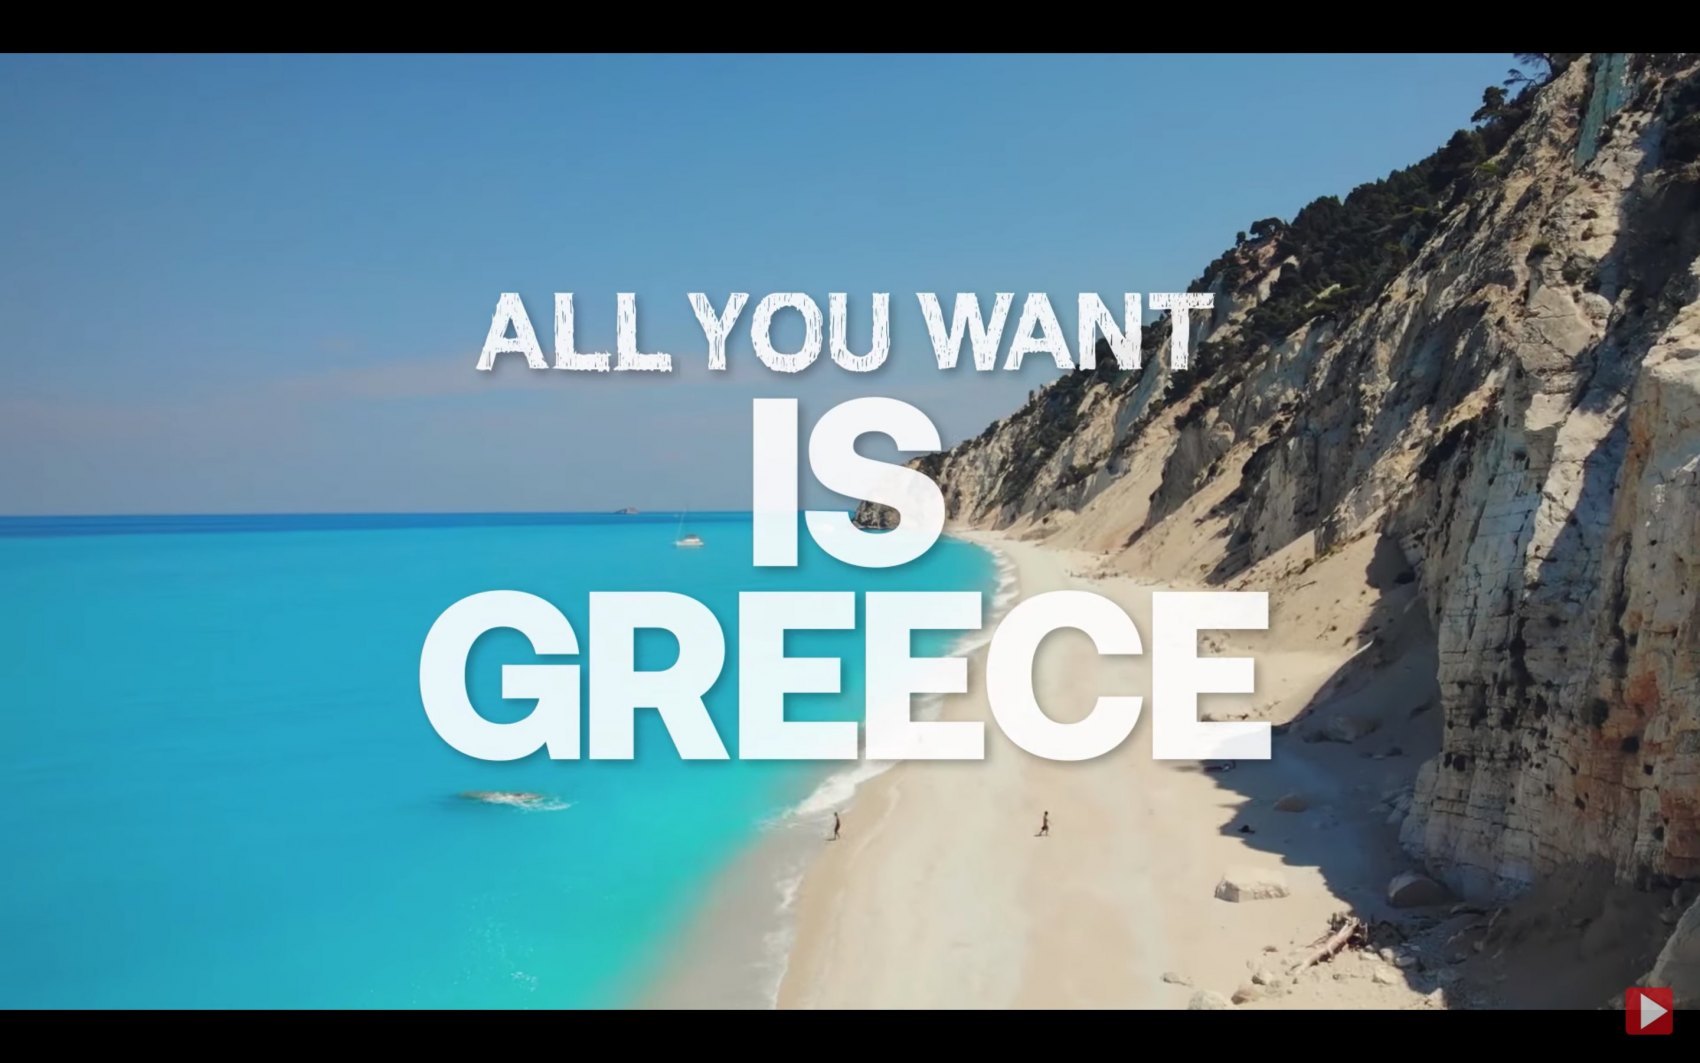 All You Want is Greece